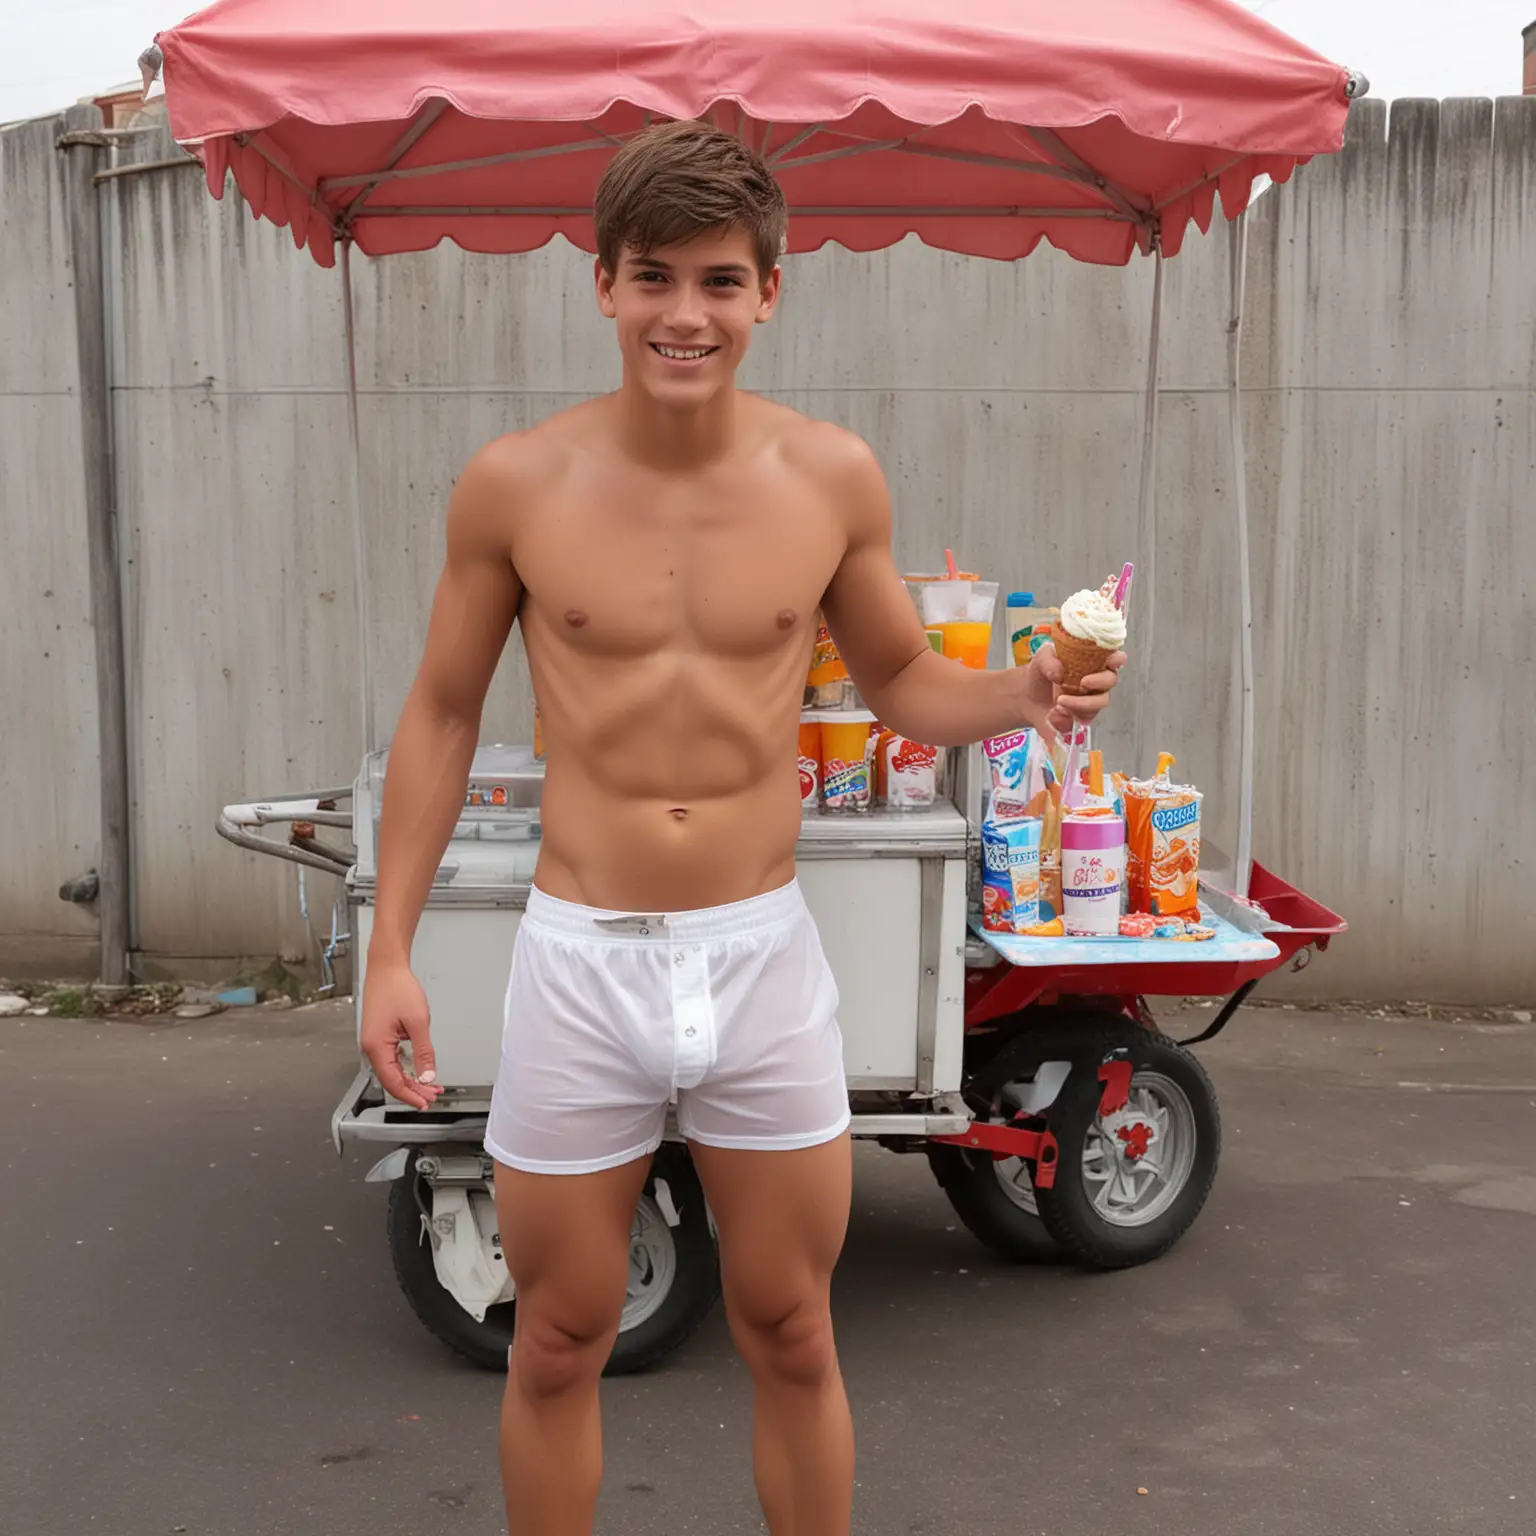 selling popsicles  from a big ice cream cart, tiny brief very short white transparent mesh tiny tight short-short boxer shorts , white flip flops, a small thin young shirtless 18-year old boyish cute  slim fit little  freezing cold smiling servile slave-boy , looking up, sharply defined abdominals, , , bare thighs, tanned feet and  nicely manicured toes